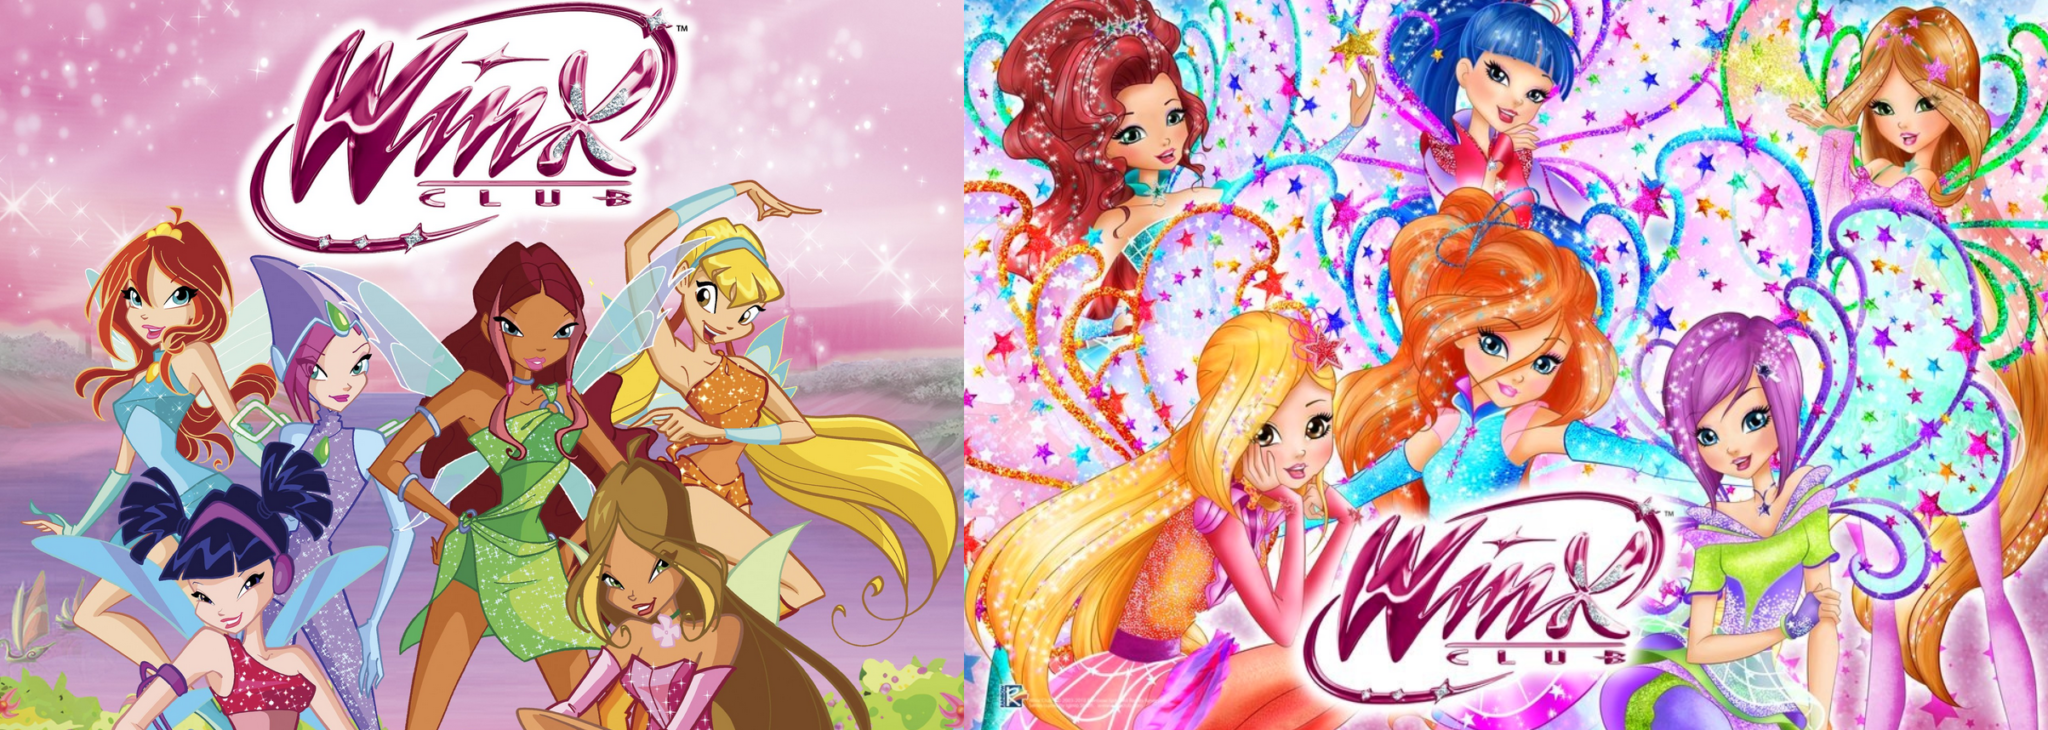 Two Winx artstyles; virant, colorful and stylized on the left, showing earlier seasons. Washed out colors and a significantly cutesy-er style called "Fairy Couture" on the right.